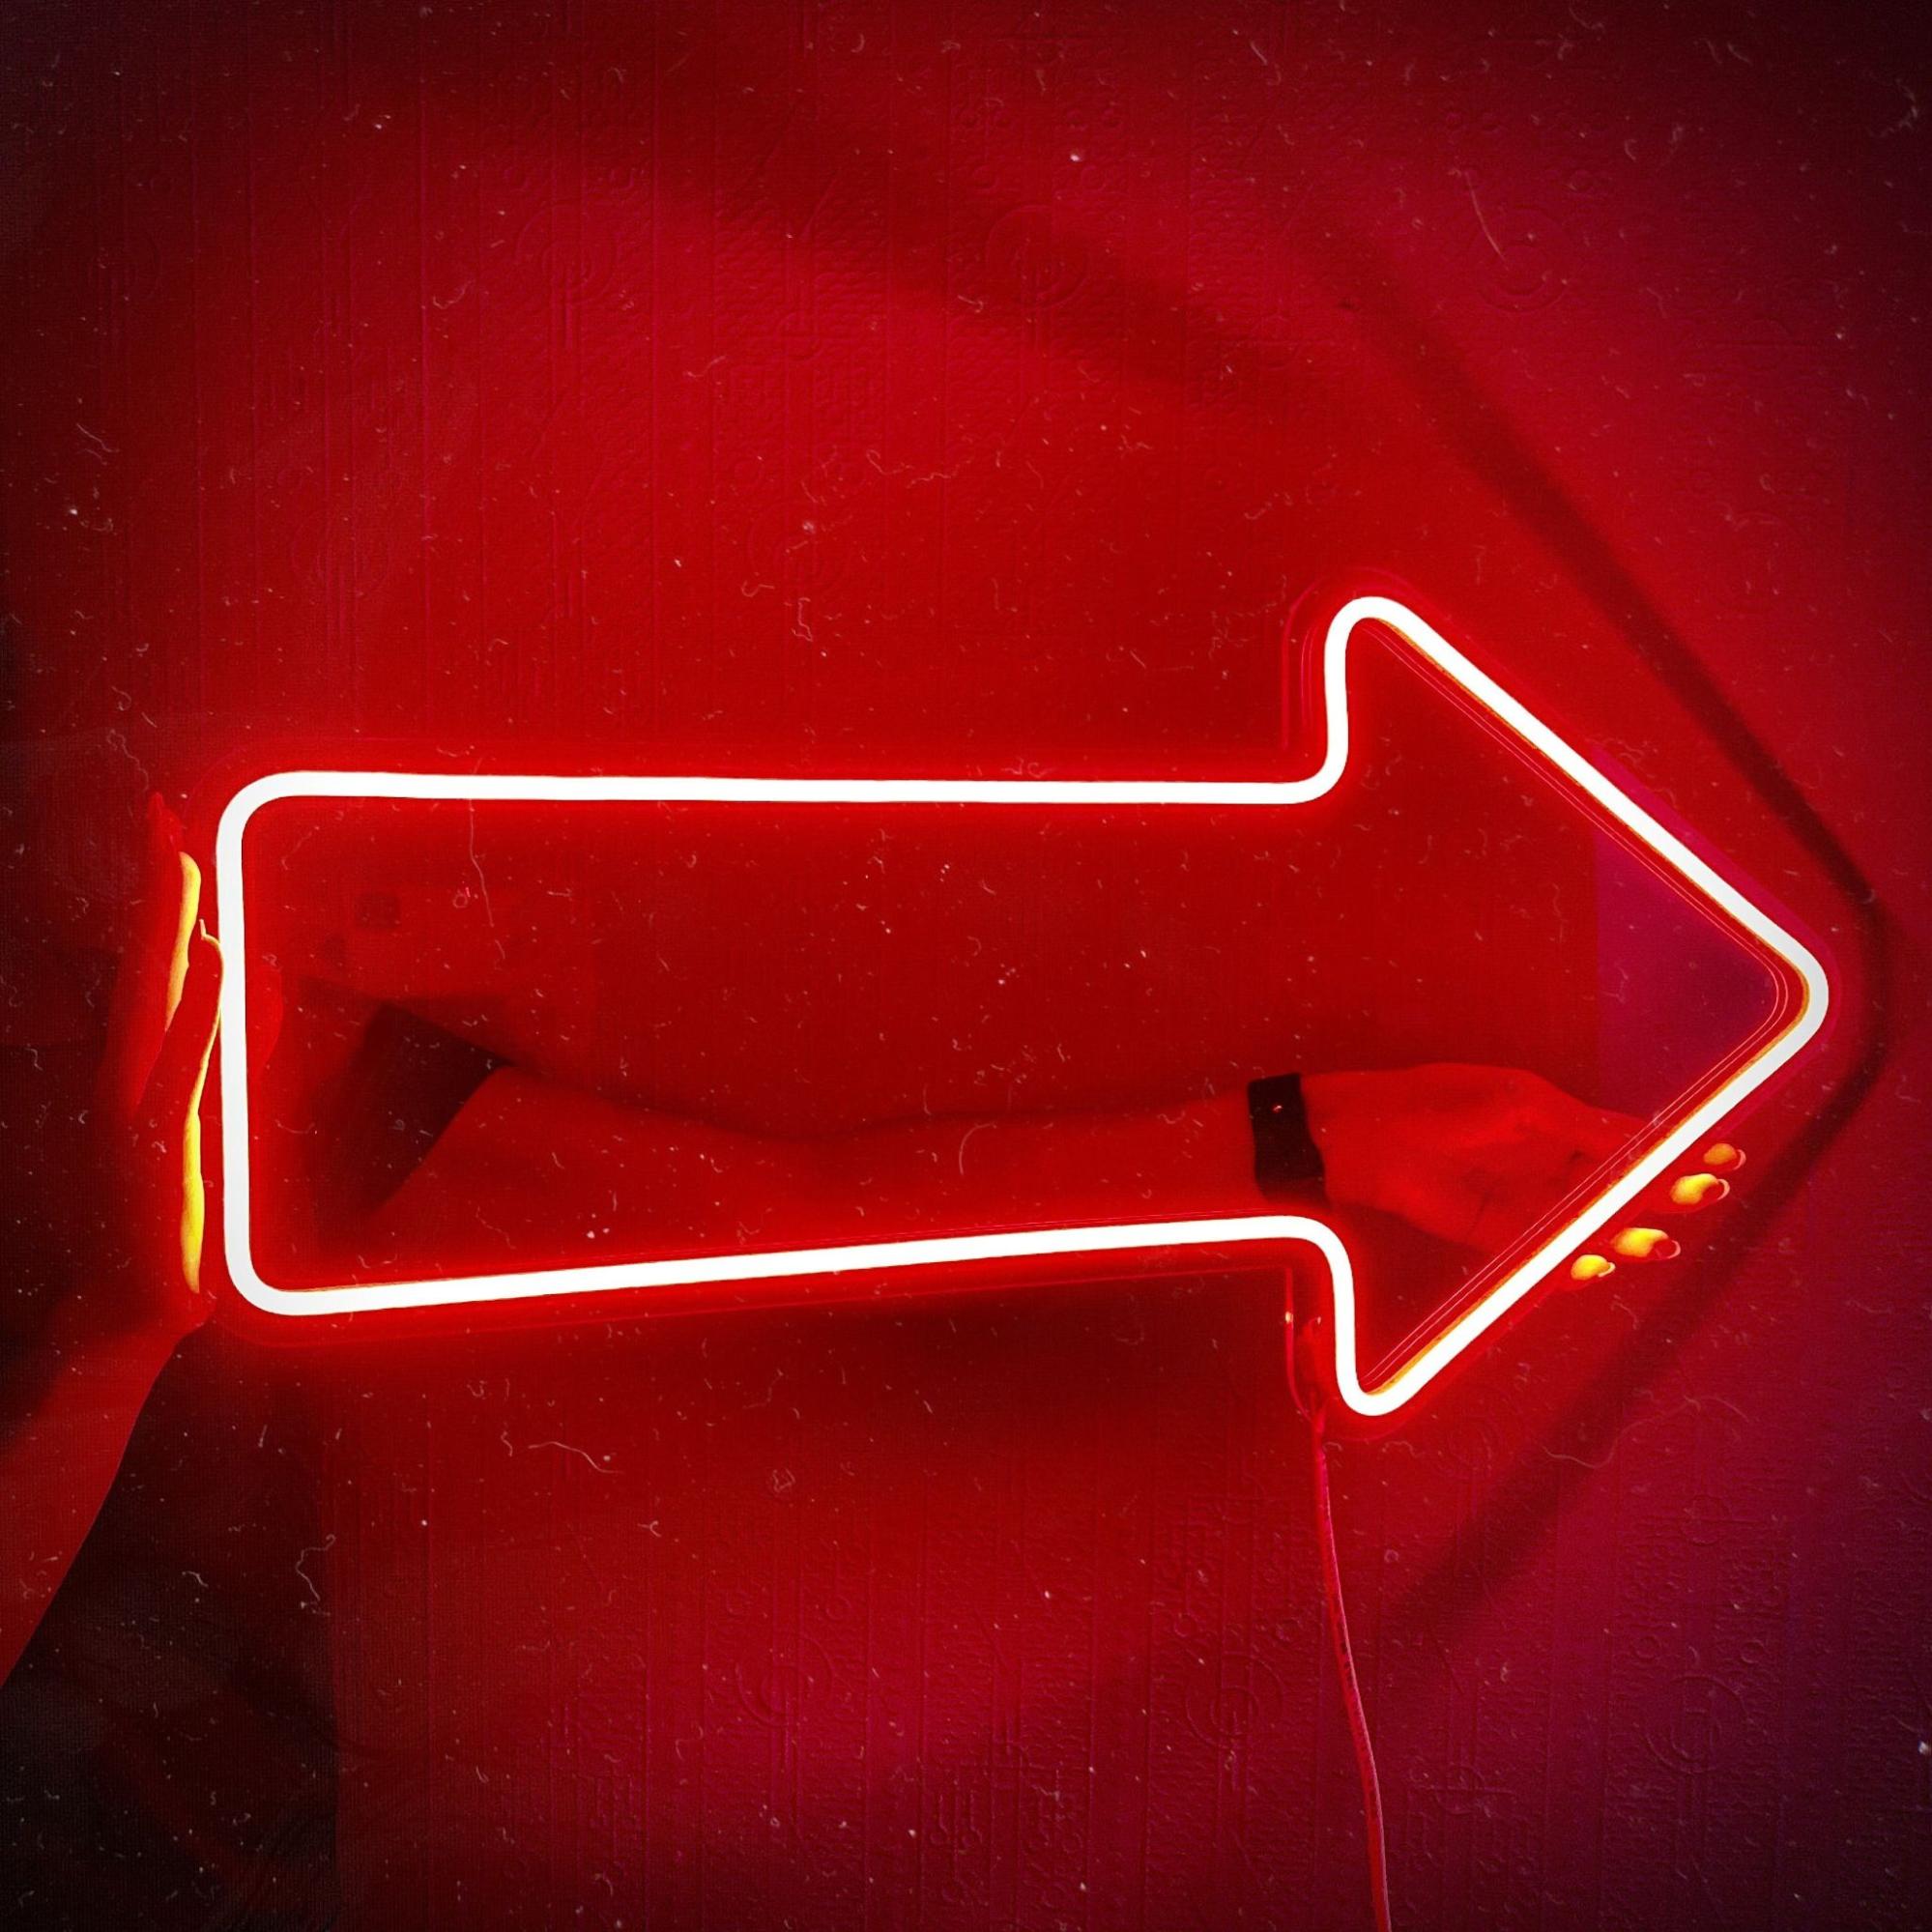 Directional neon signs are the perfect guideline in party